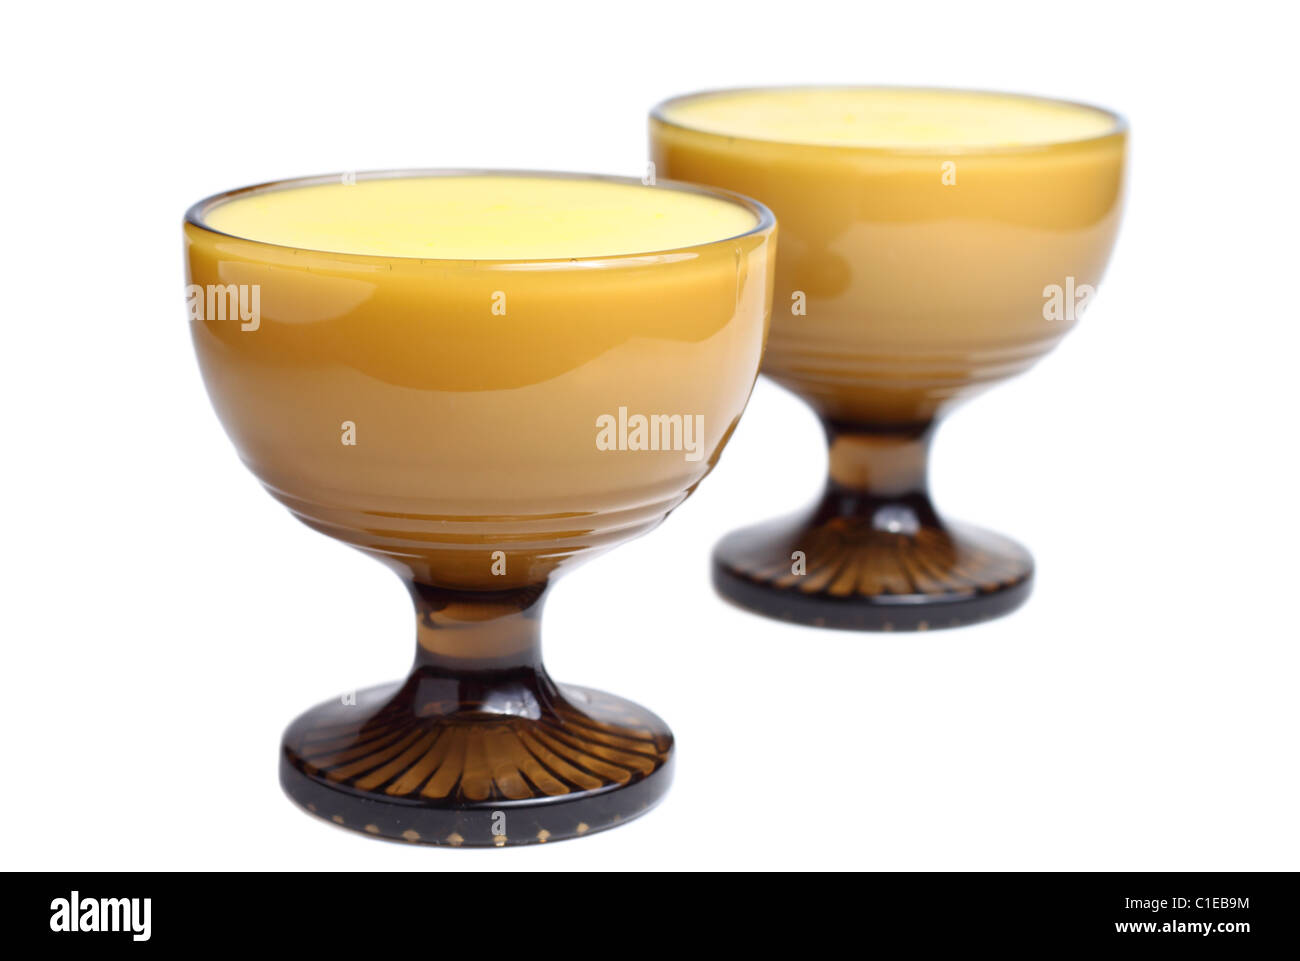 Two glass bowls of vanilla-flavored pudding Stock Photo